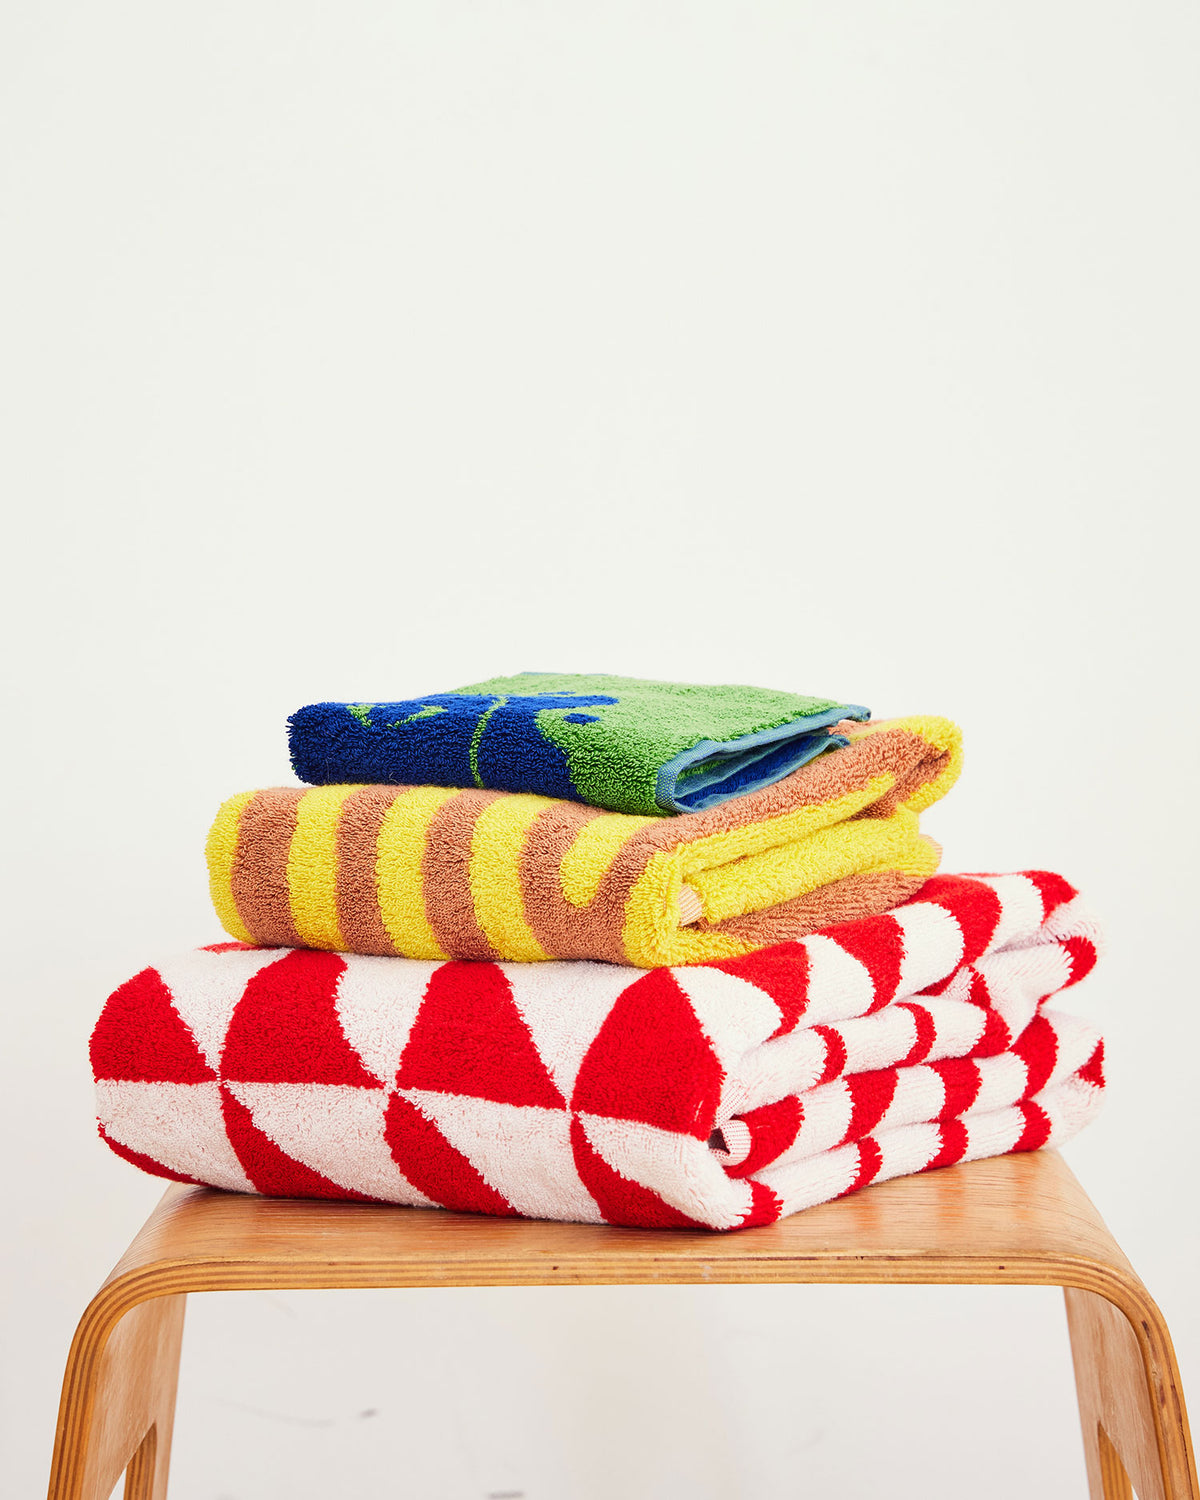 Dusen Dusen Terra Pattern Towels. 100% brushed cotton terry, 700 GSM, in a trio of patterns. Bath towel: 30"x56". Hand towel: 20"x 30". Washcloth: 12"x12". Made in Portugal.